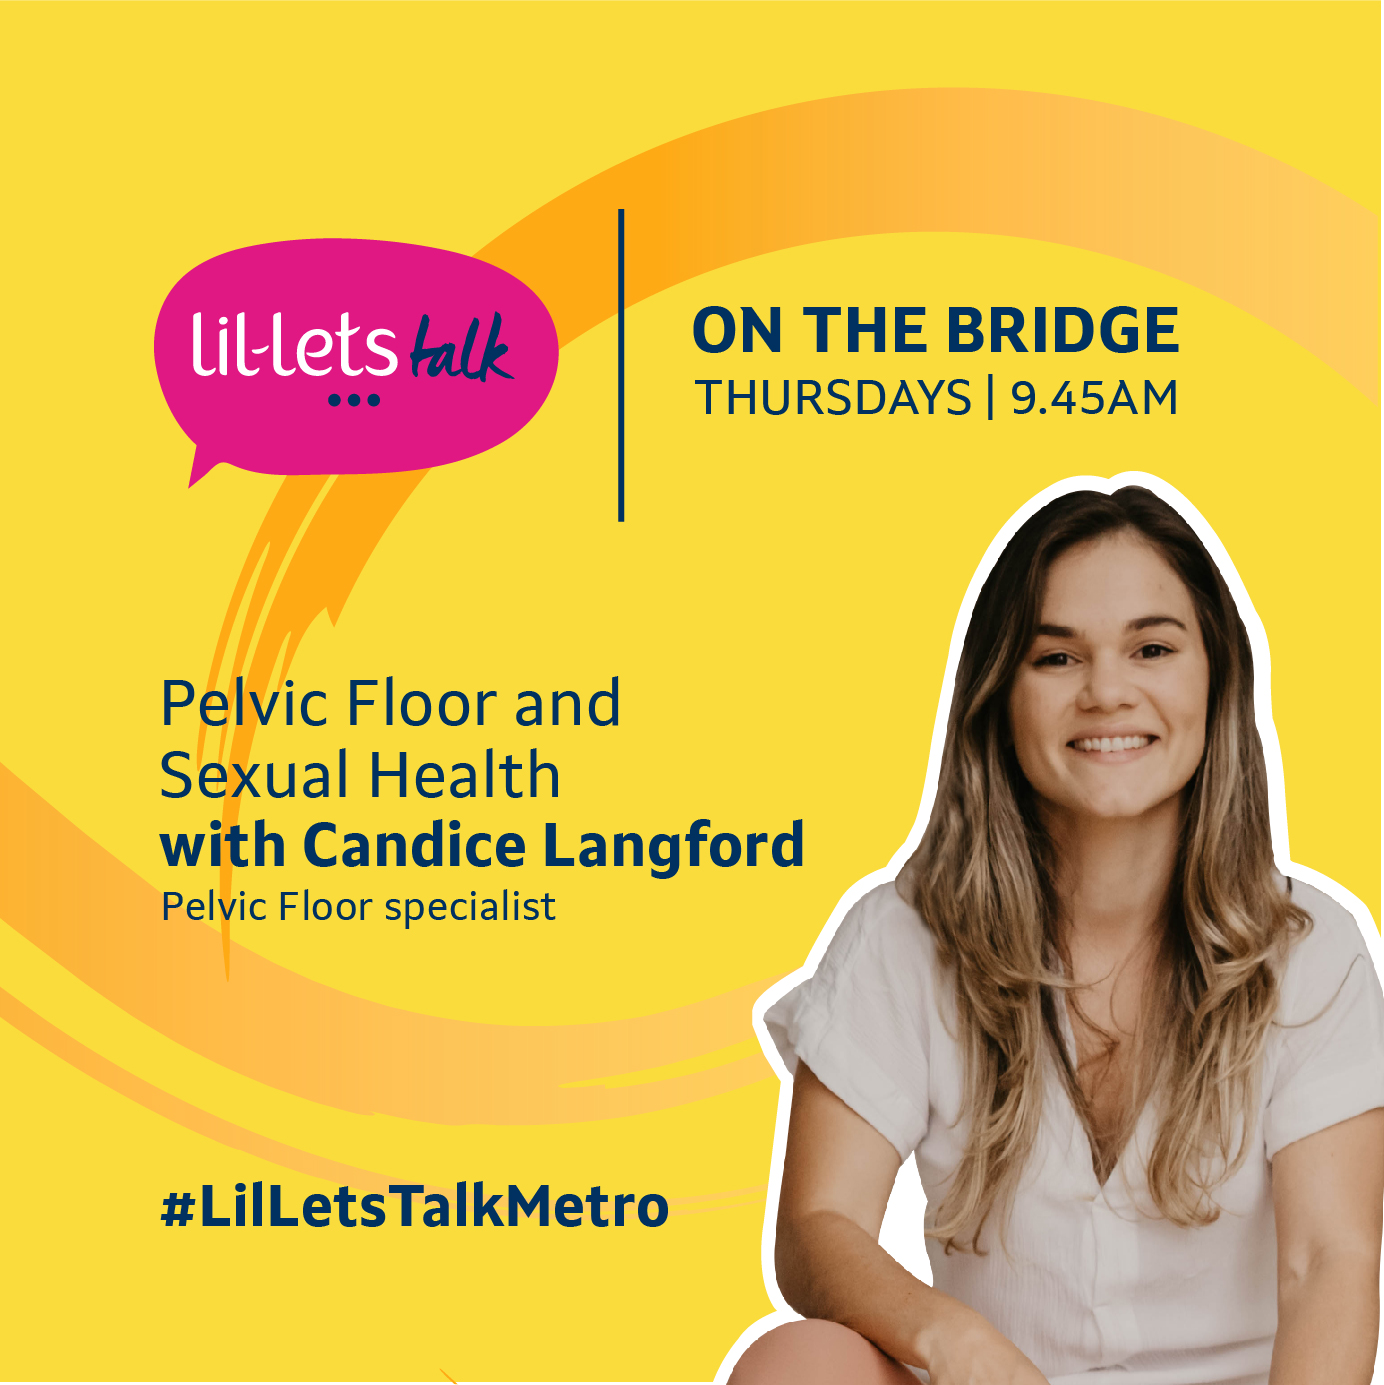 Pelvic Floor and Sexual Health with Candice Langford